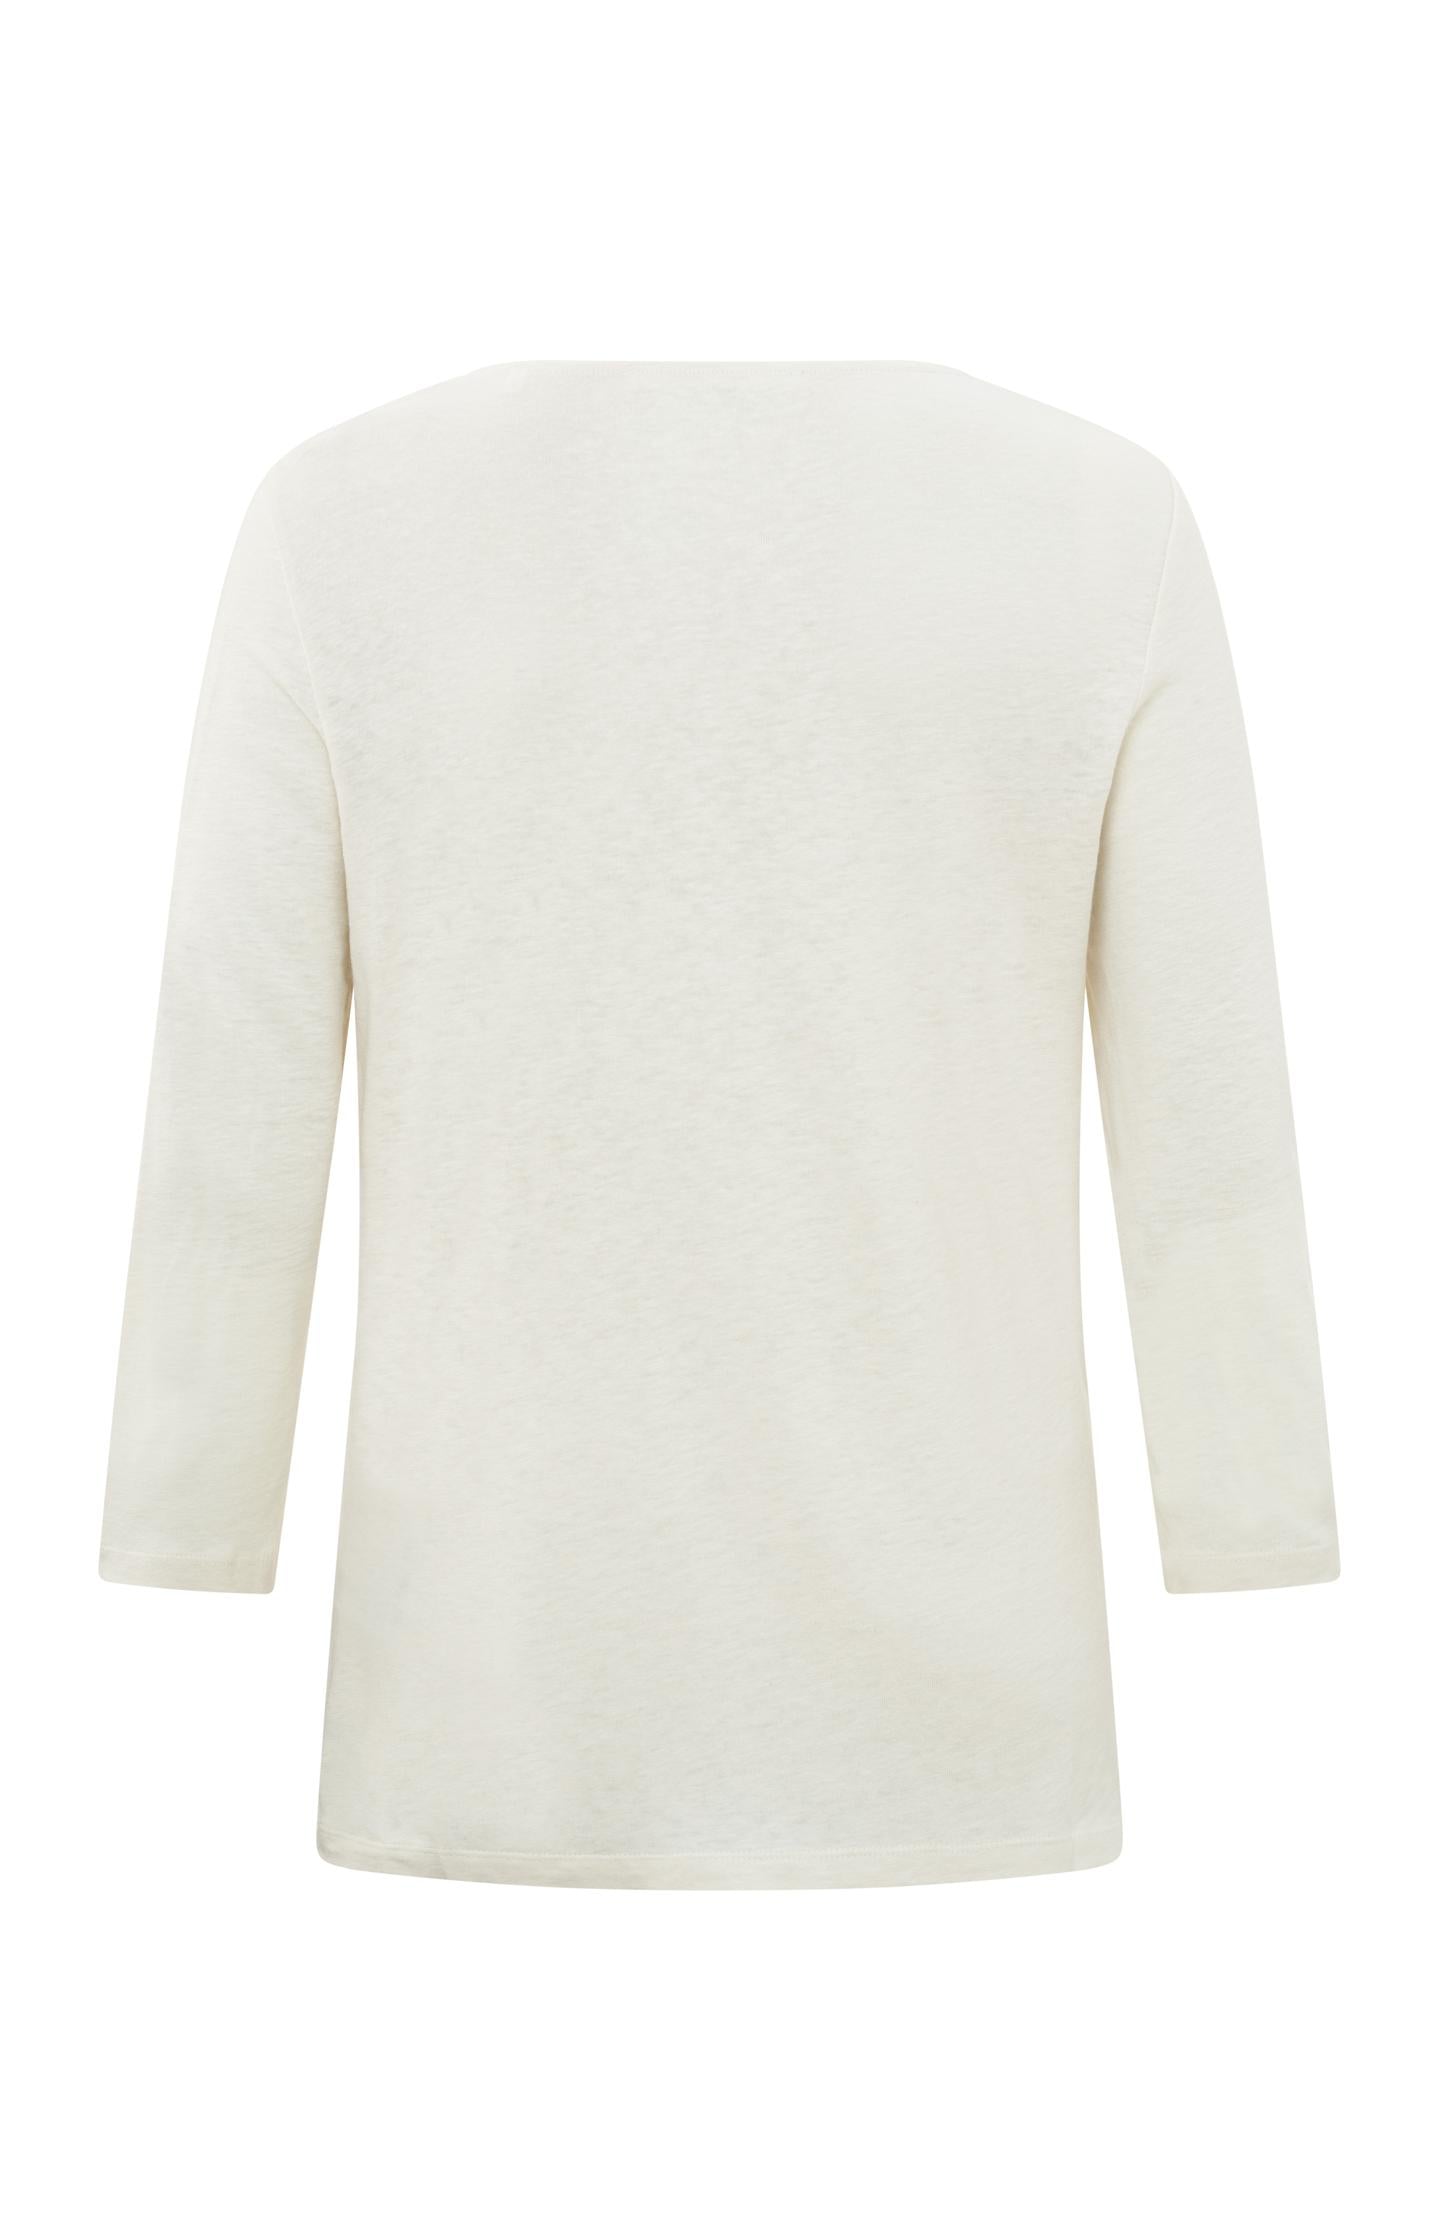 Shirt with 3/4 sleeves and round neck